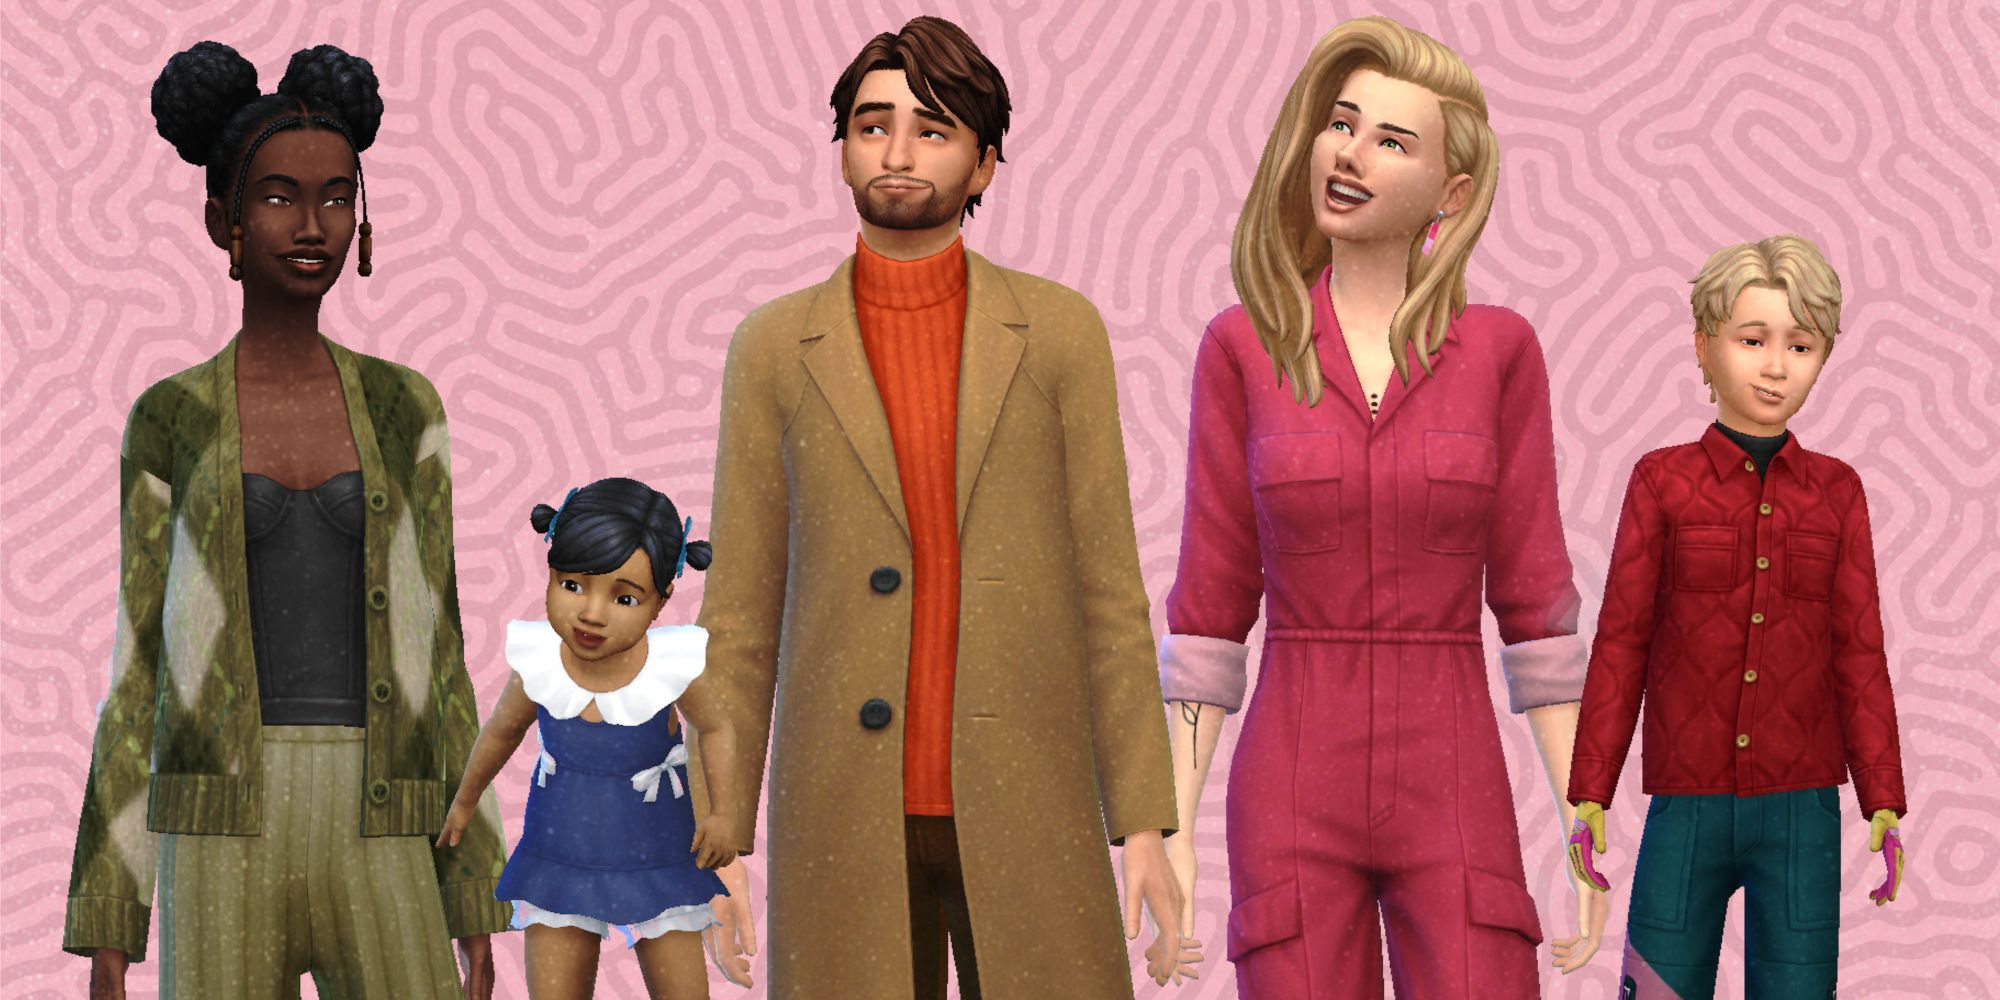 Five Sims from Sims 4 posing in various outfits